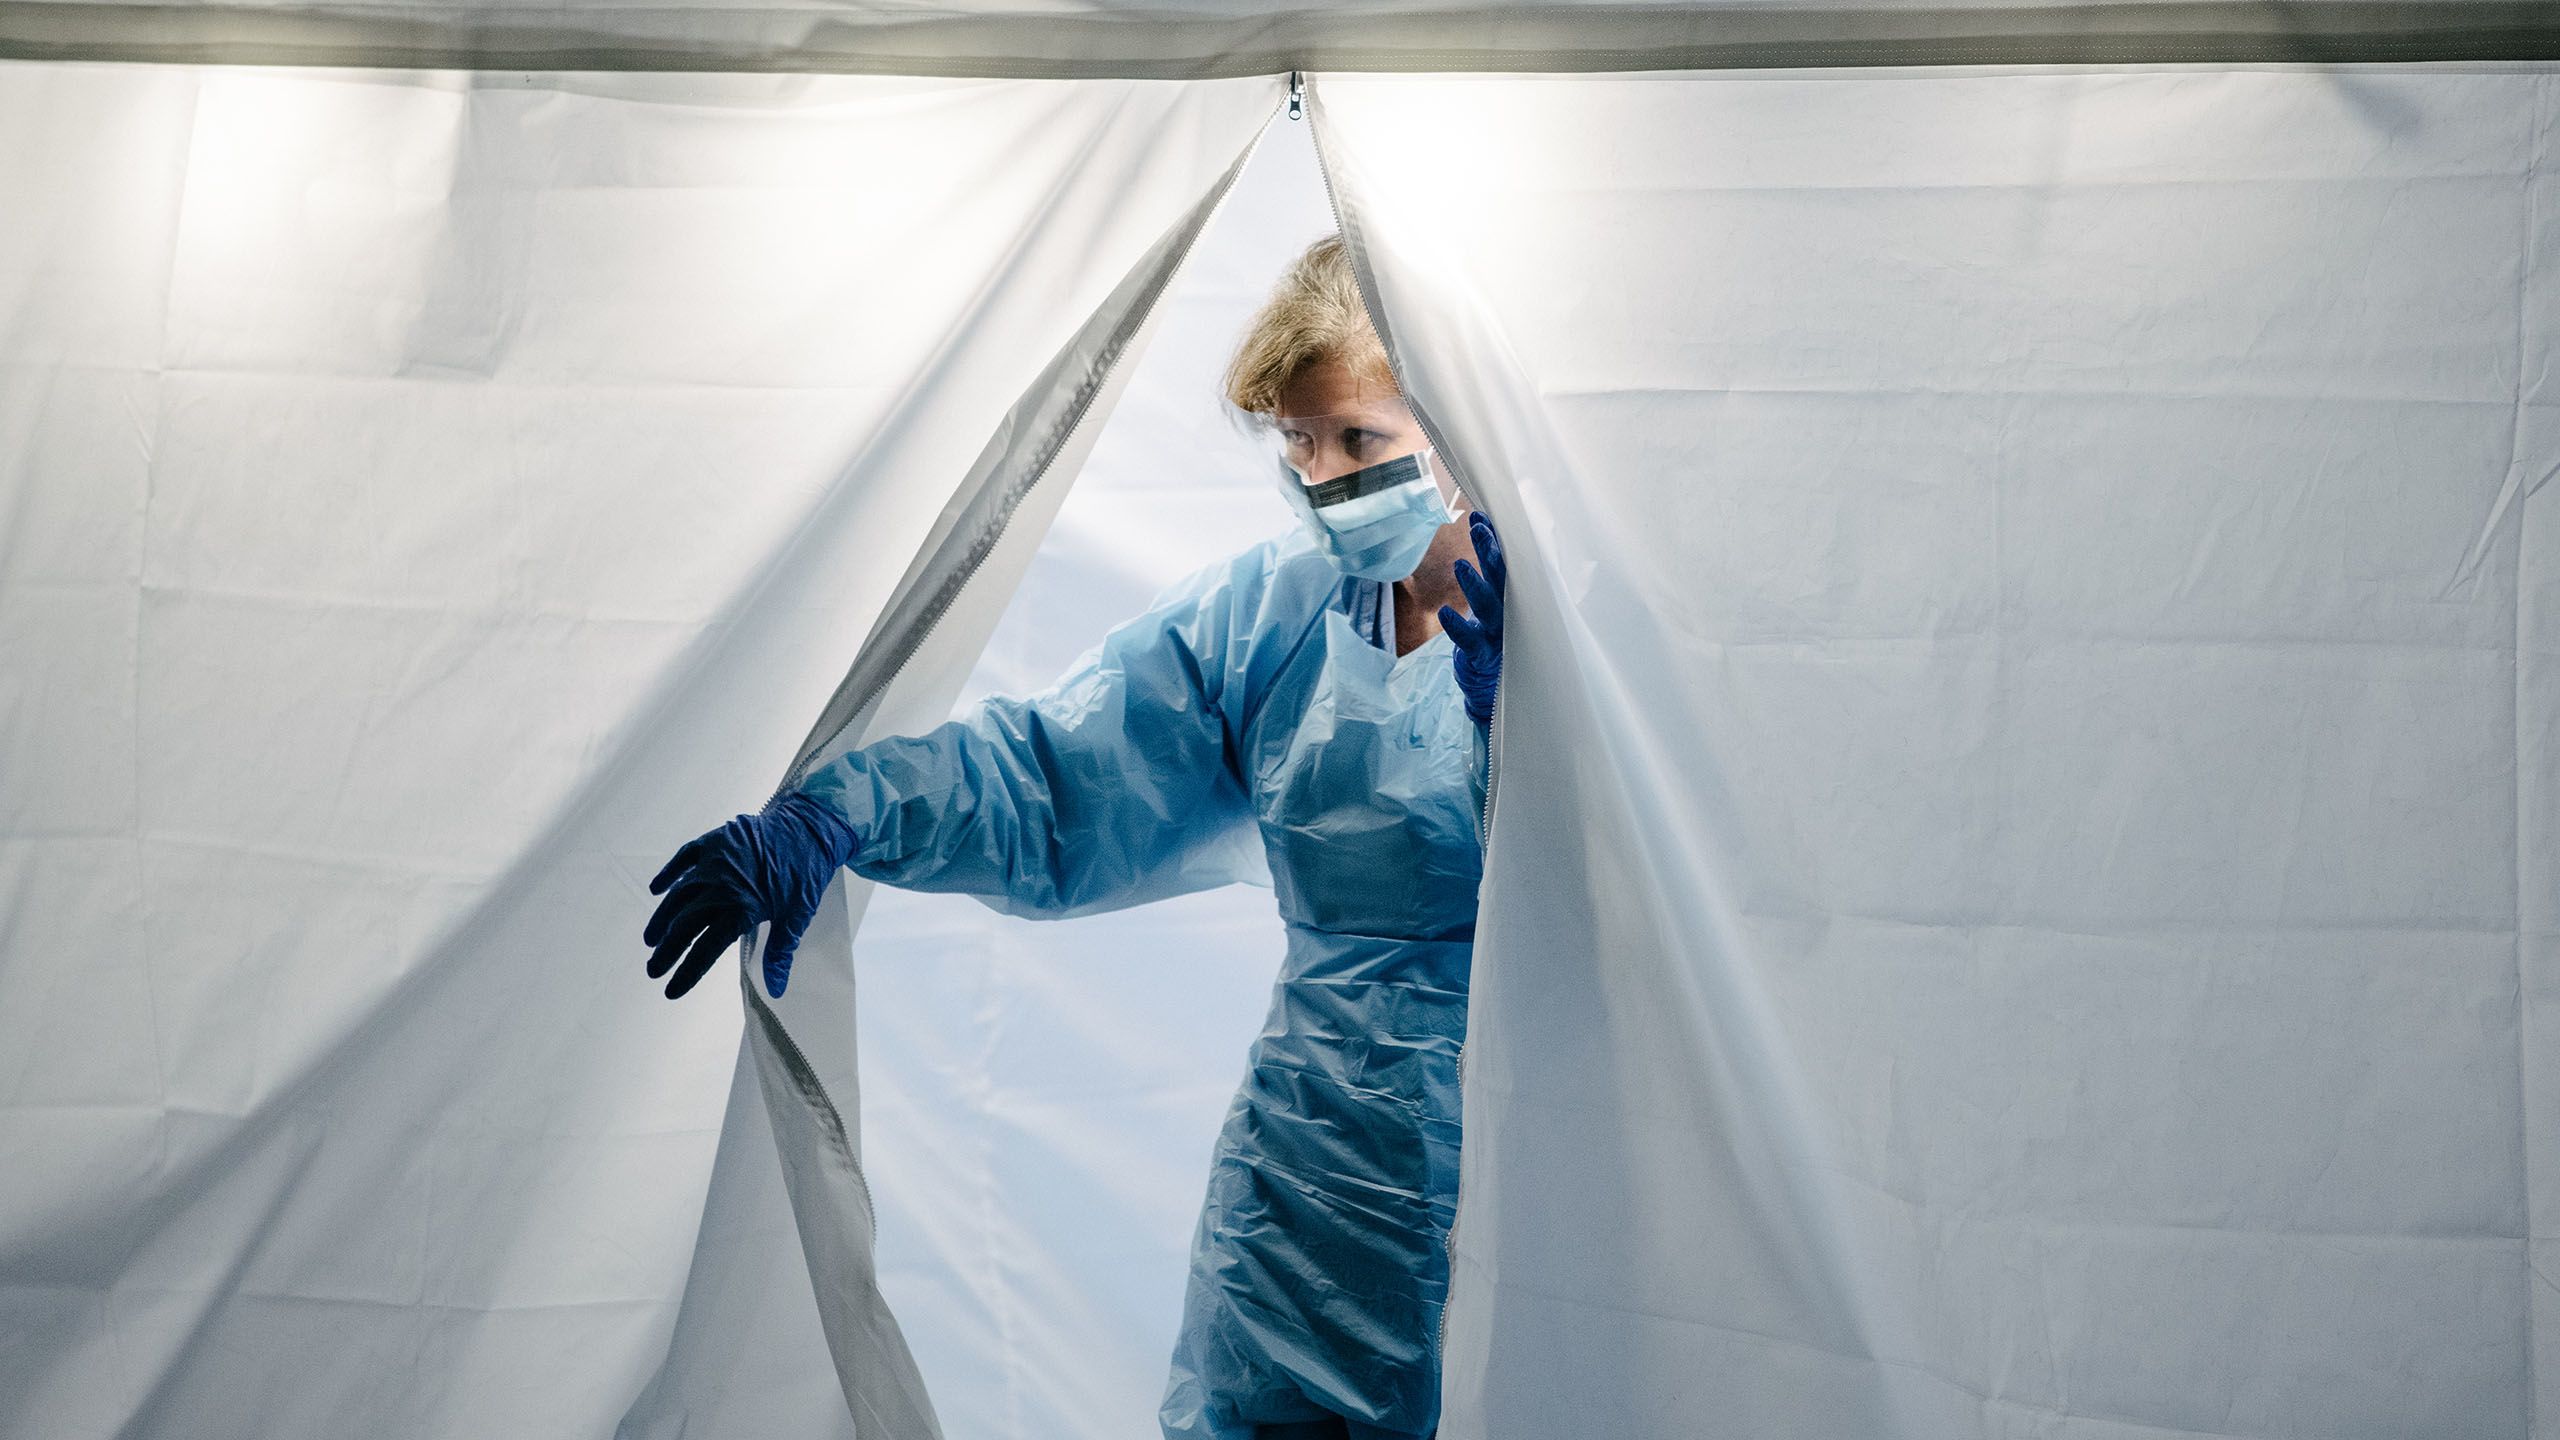 UW Medicine COVID-19 tester exits tent wearing personal protective equipment